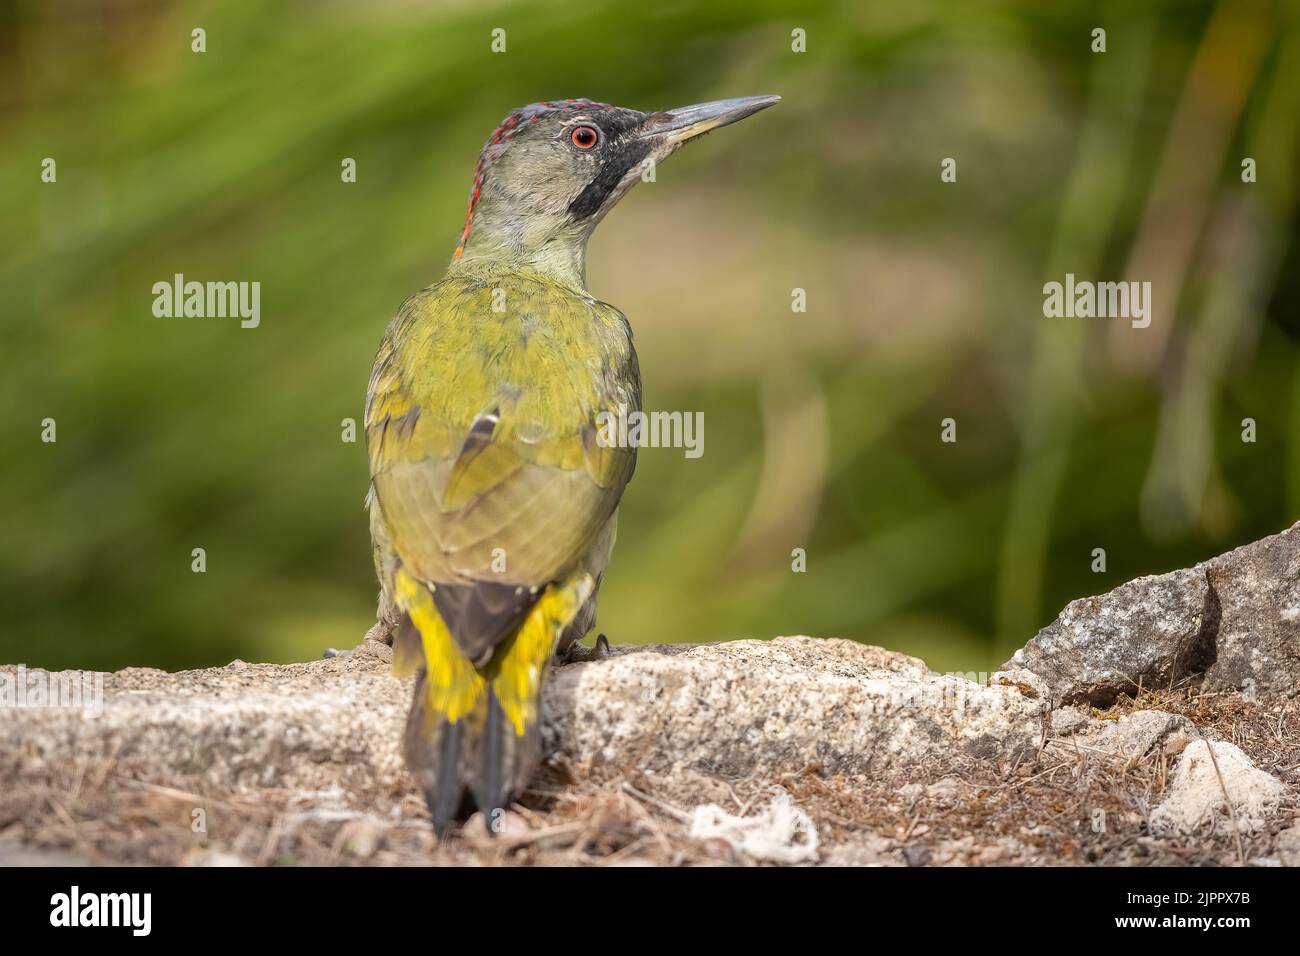 A young Iberian Green Woodpecker (Picus sharpei) on racks in grassland, Andalucia, Spain Stock Photo